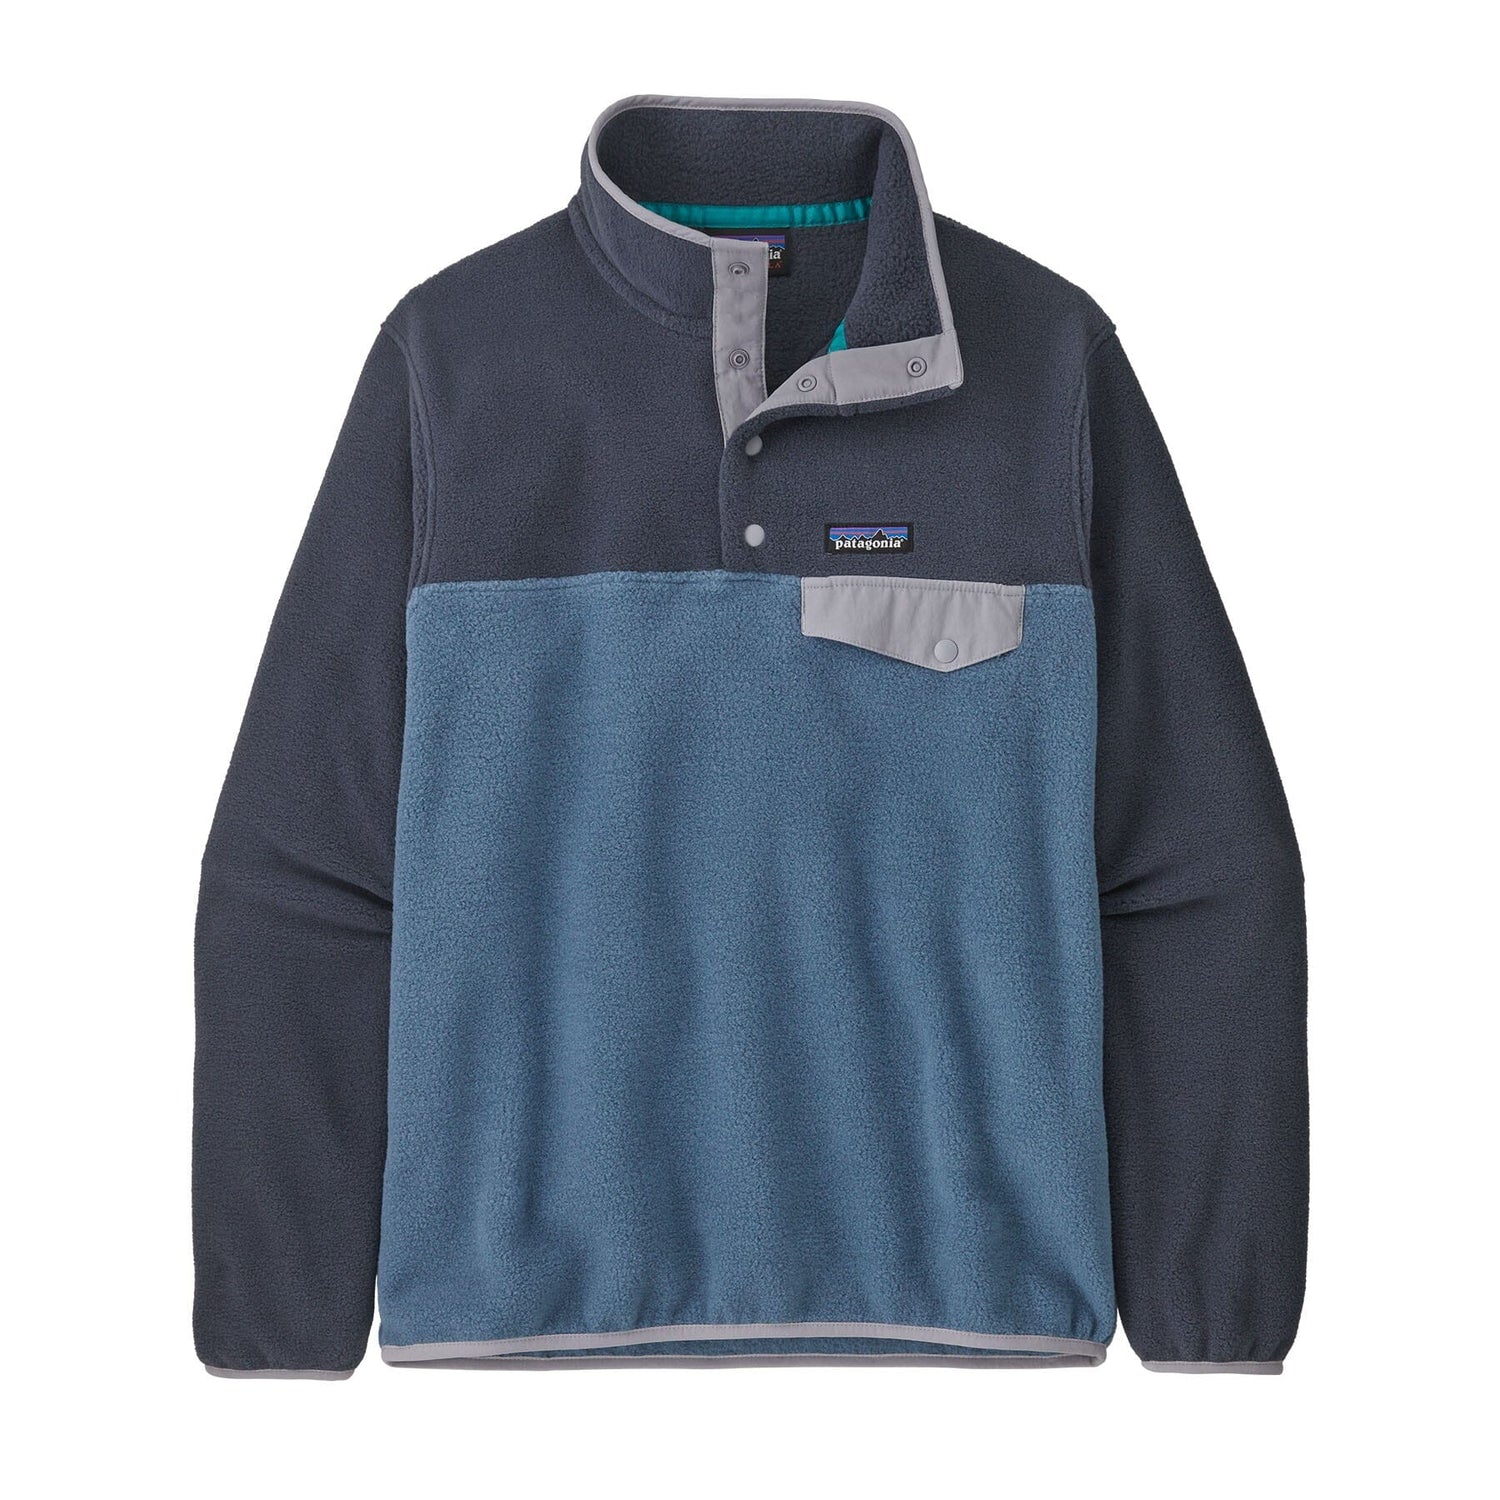 Patagonia W's Lightweight Synchilla Snap-T Fleece Pullover - Recycled Polyester Utility Blue Shirt